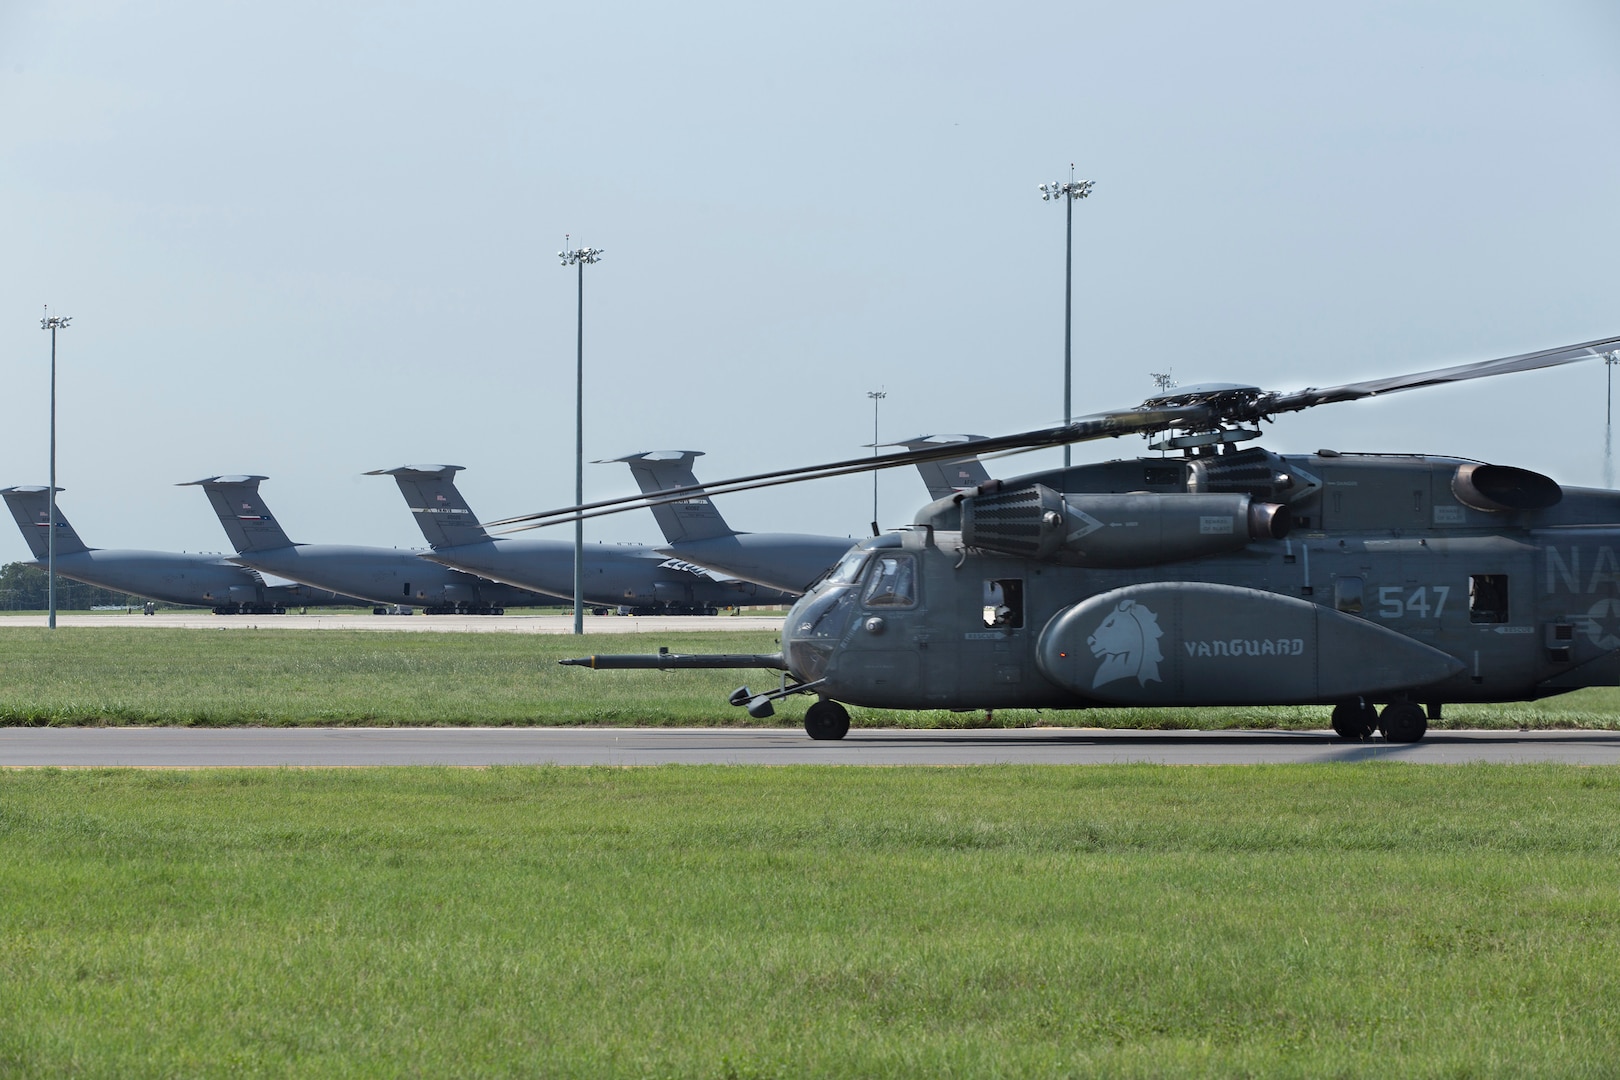 A MH-53E Sea Dragon with Helicopter Mine Countermeasures Squadron for Hurricane Harvey relief missions